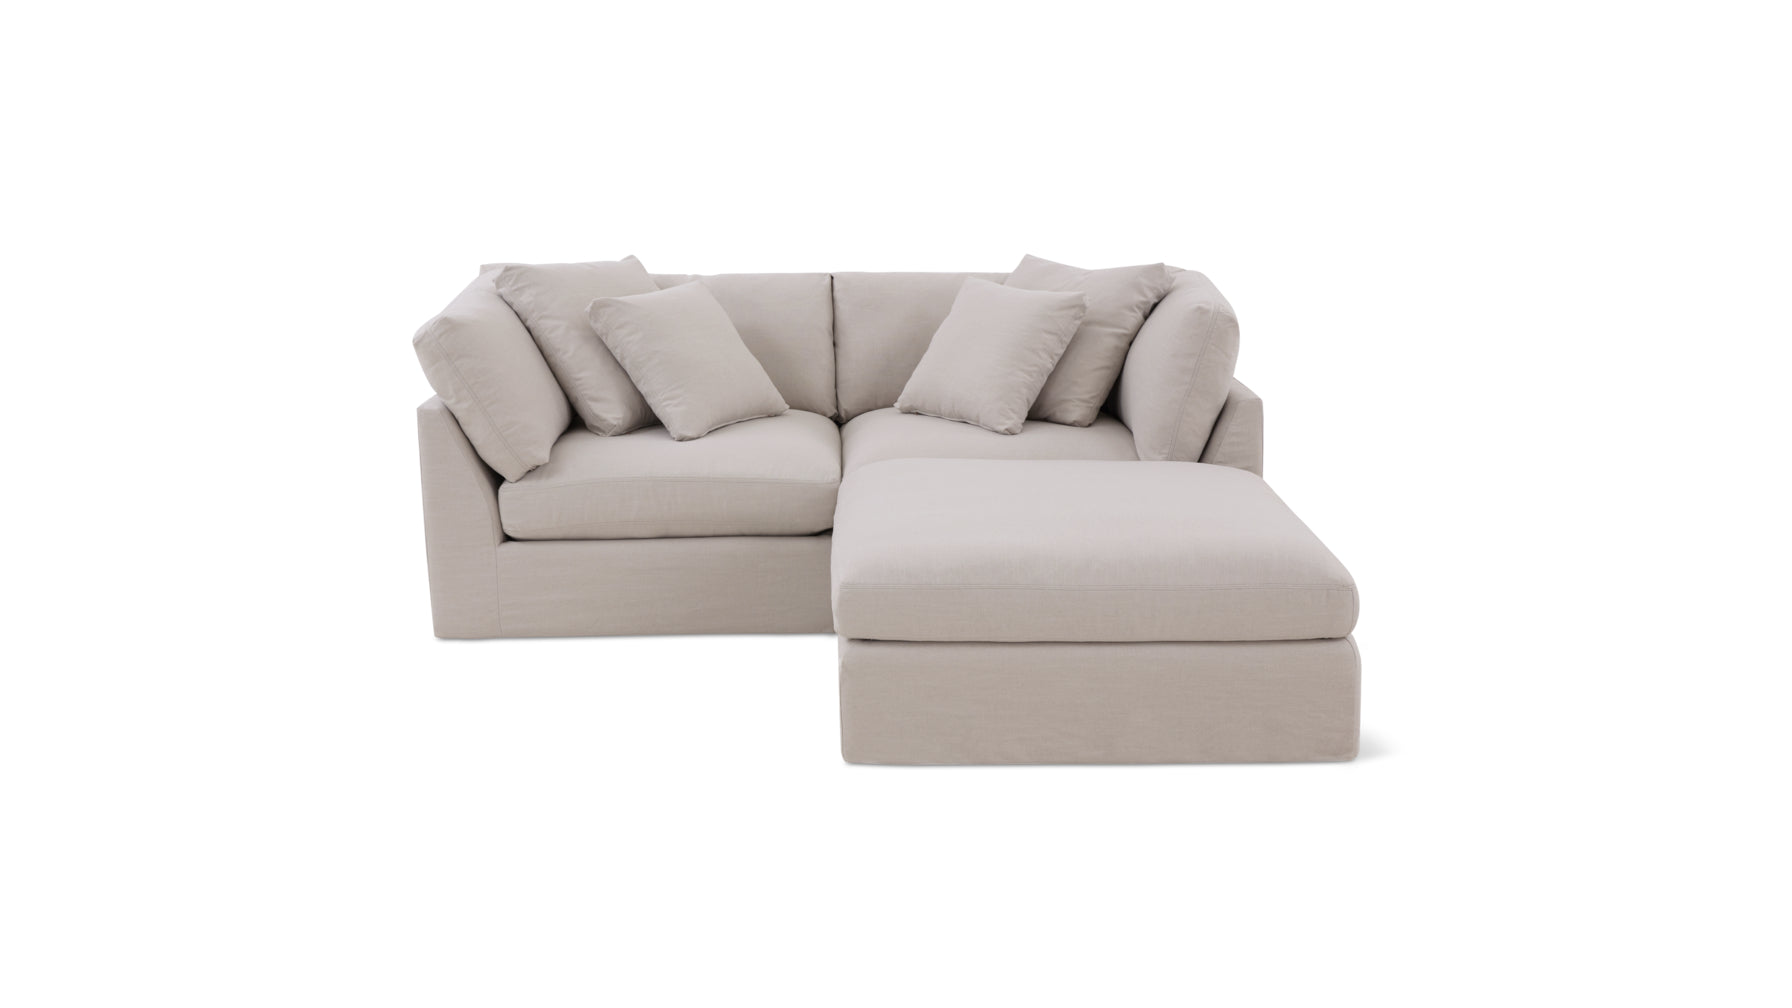 Get Together™ 3-Piece Modular Sectional, Large, Clay - Image 1